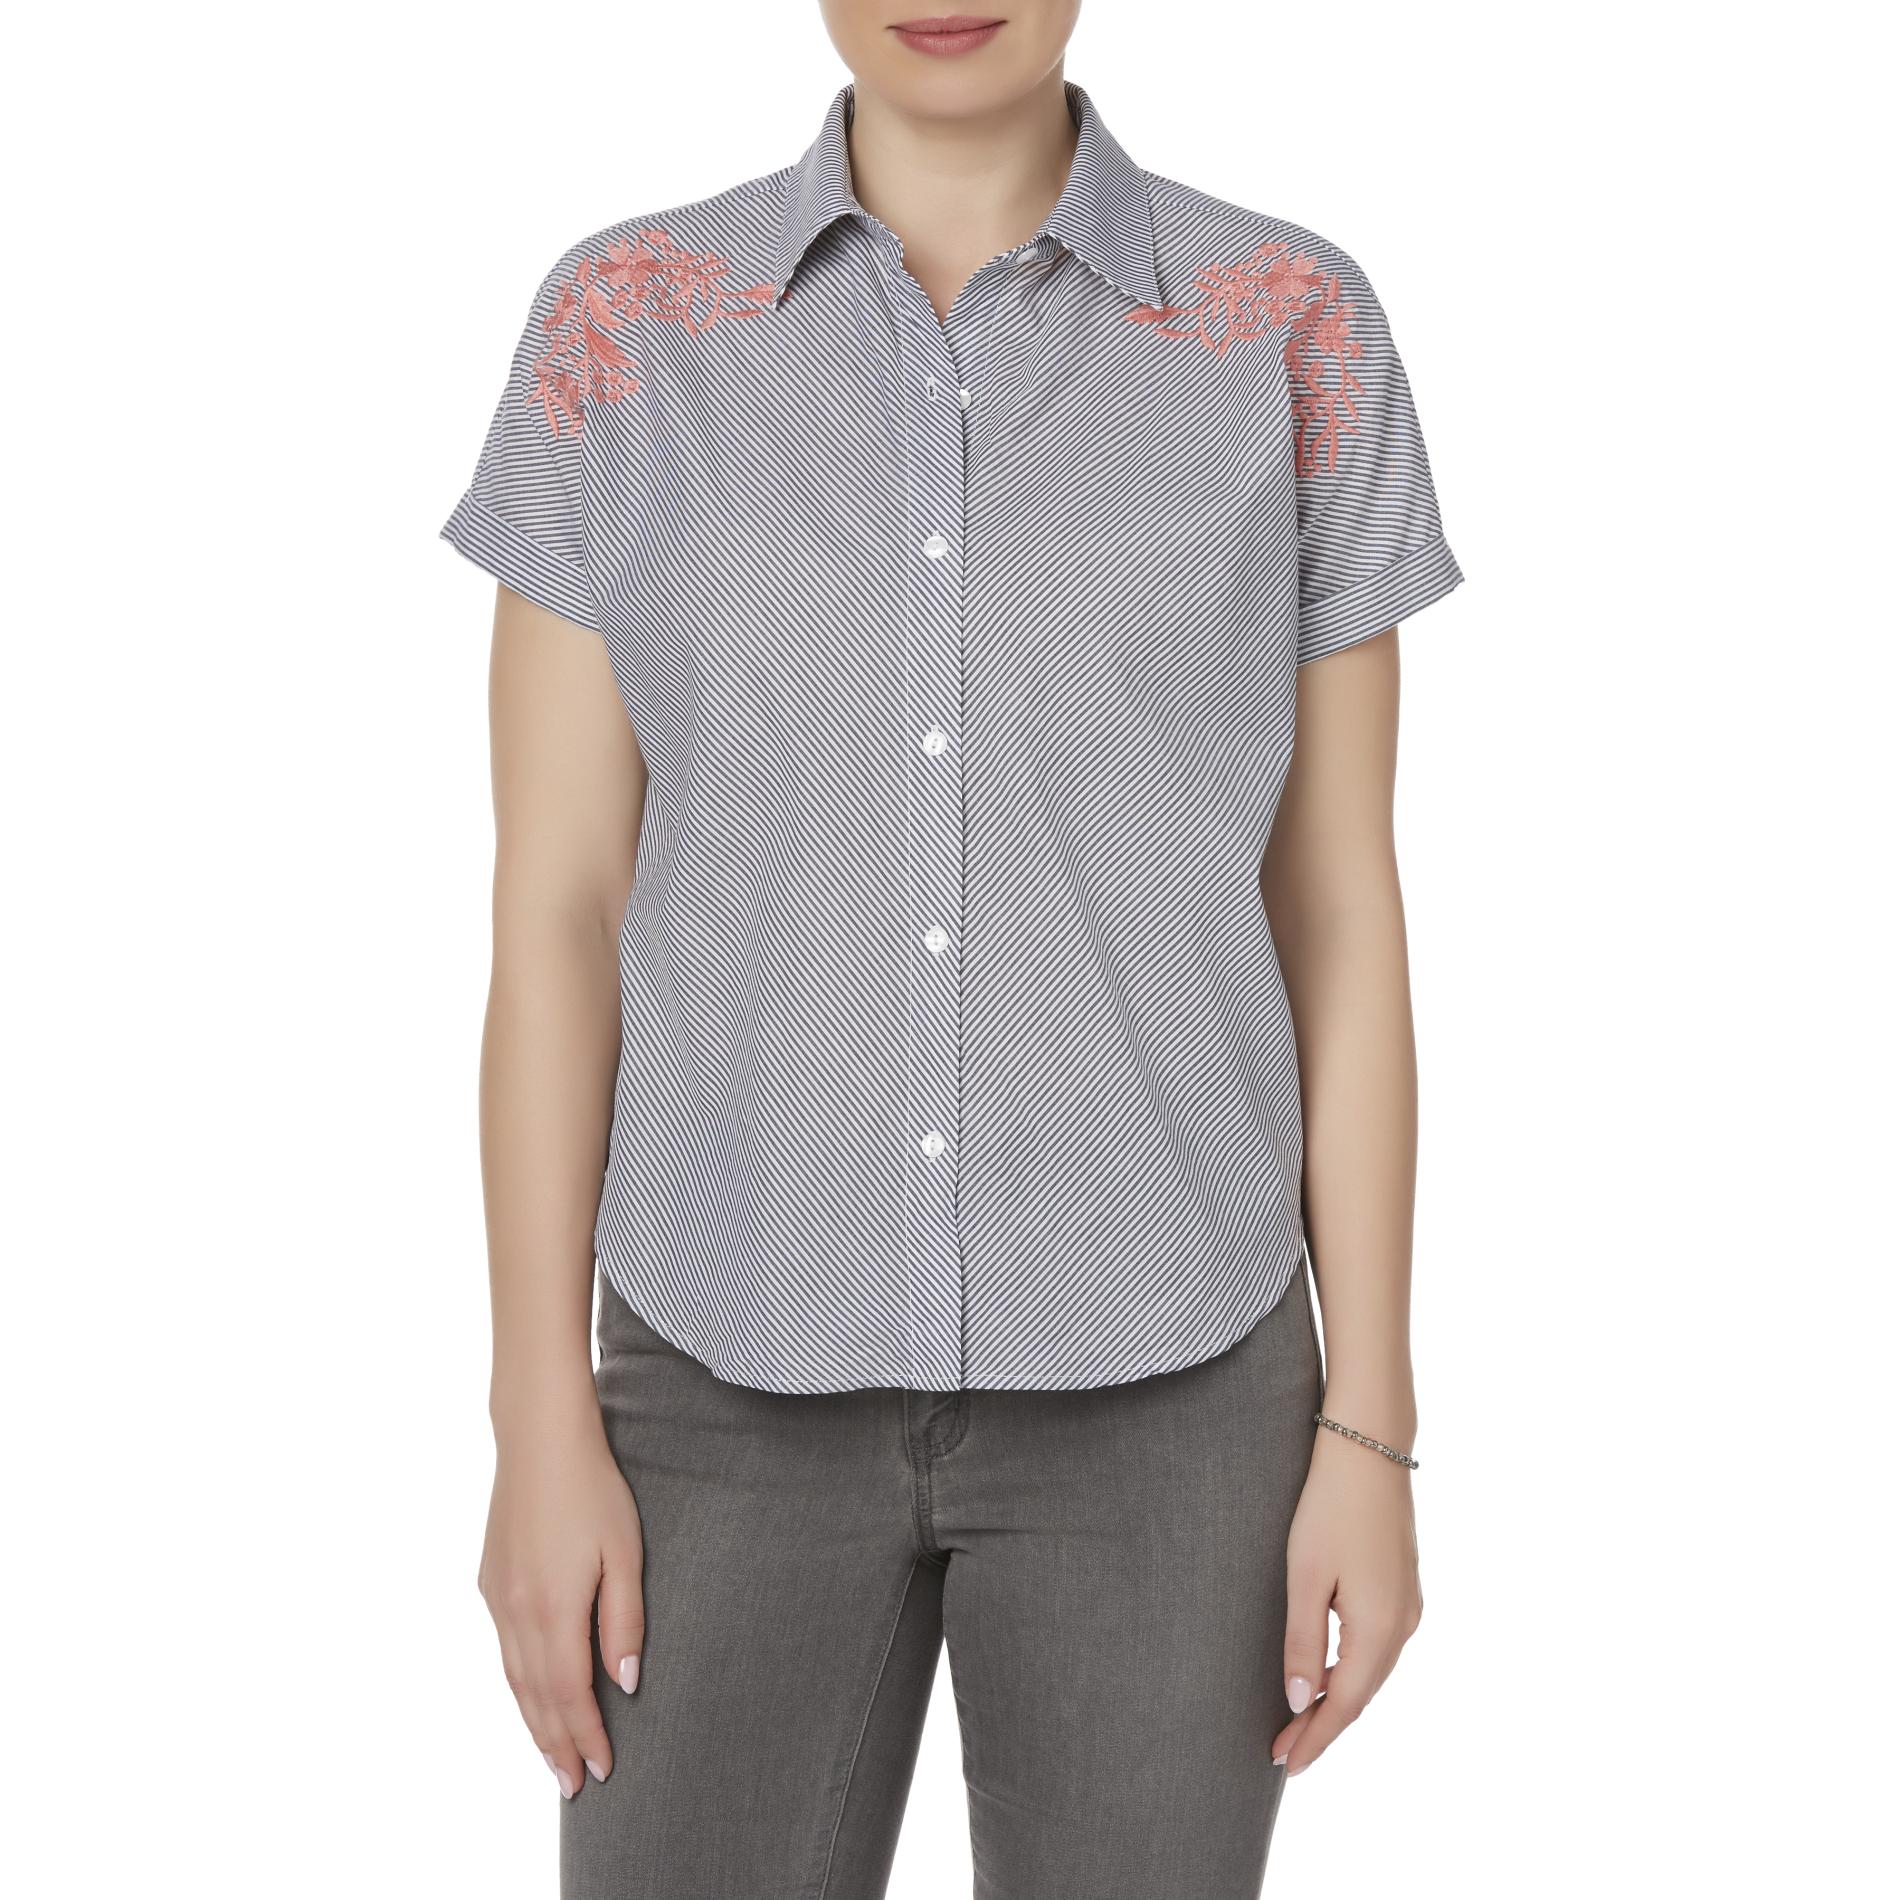 Simply Styled Women's Embroidered Knotted Shirt - Striped